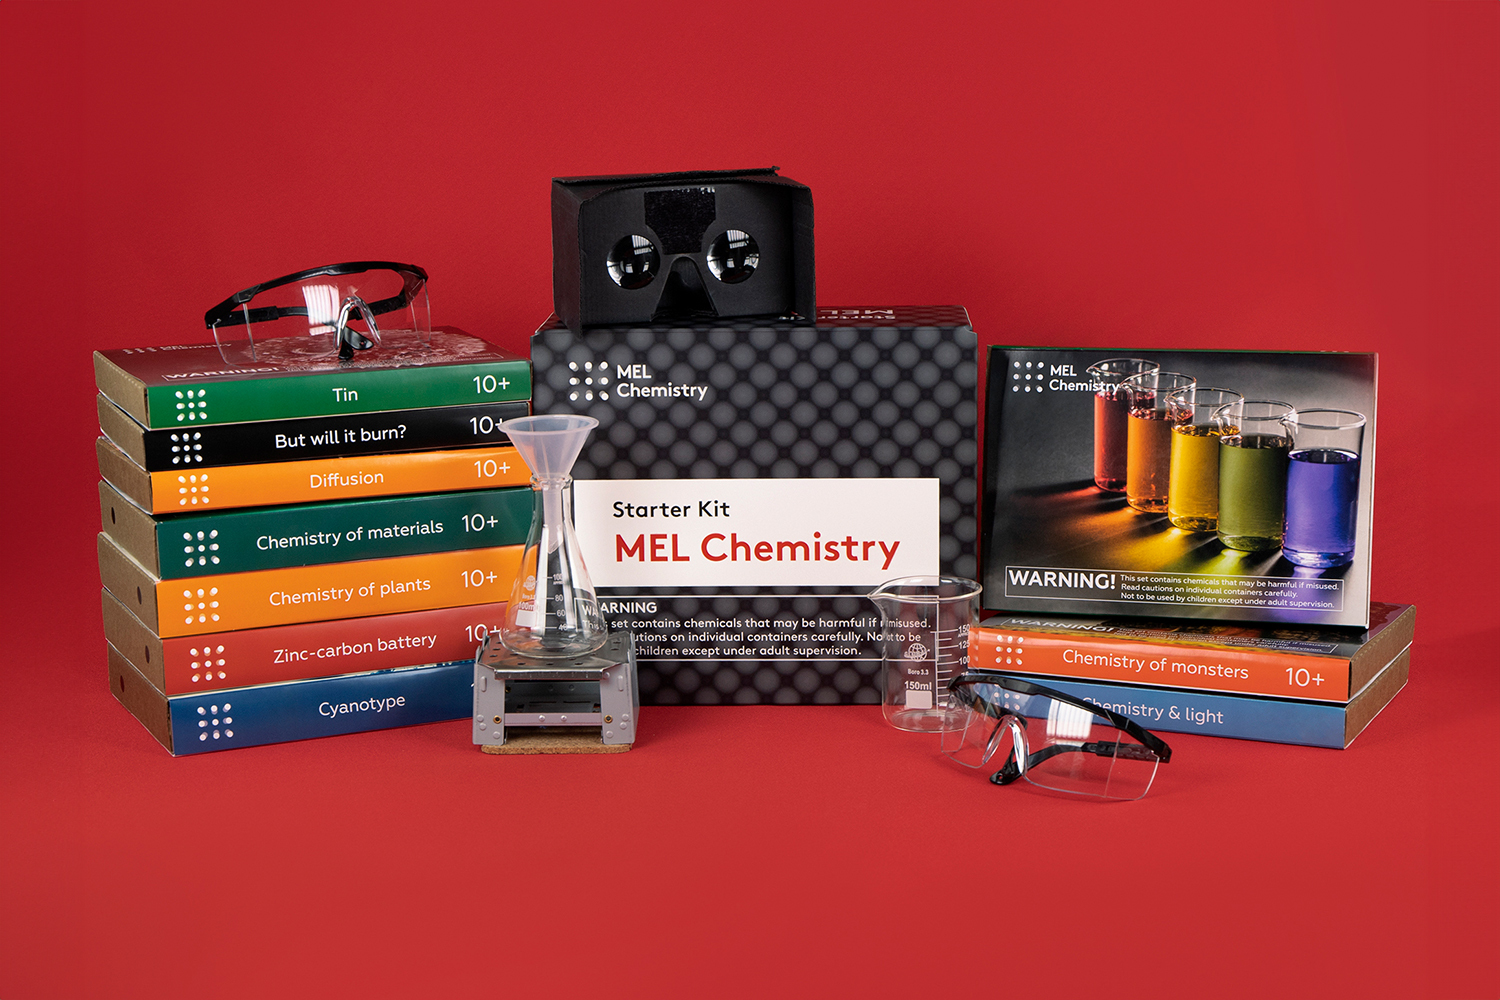 An image of a science kit designed for 5th grade students, perfect for exploring the wonders of science and satisfying curiosity with science kits for 5th grade